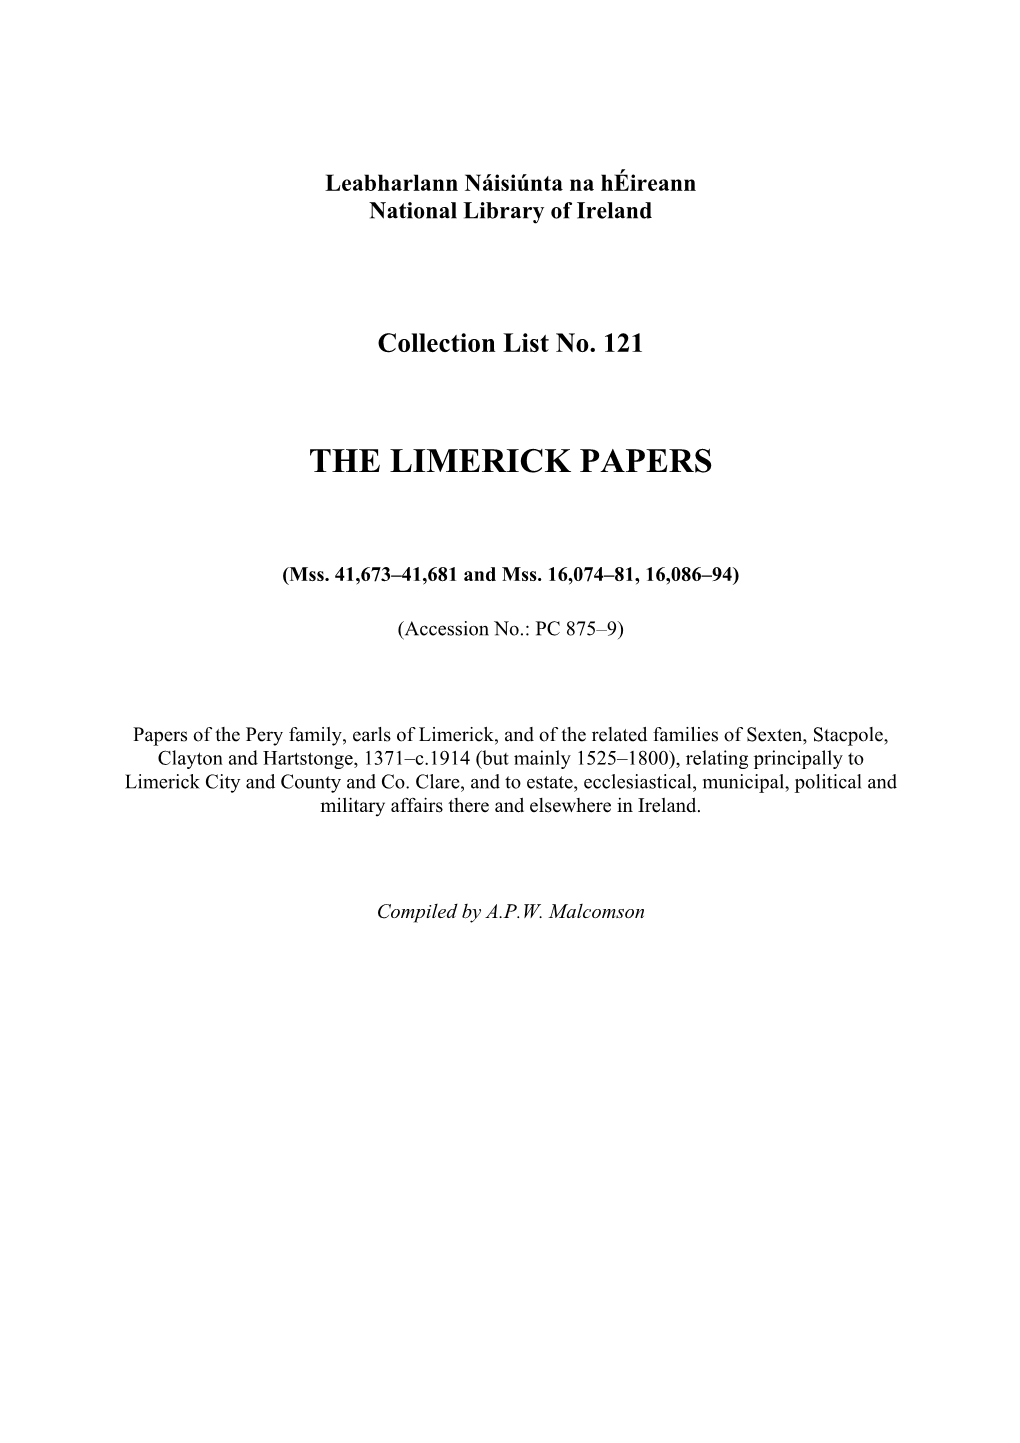 The Limerick Papers